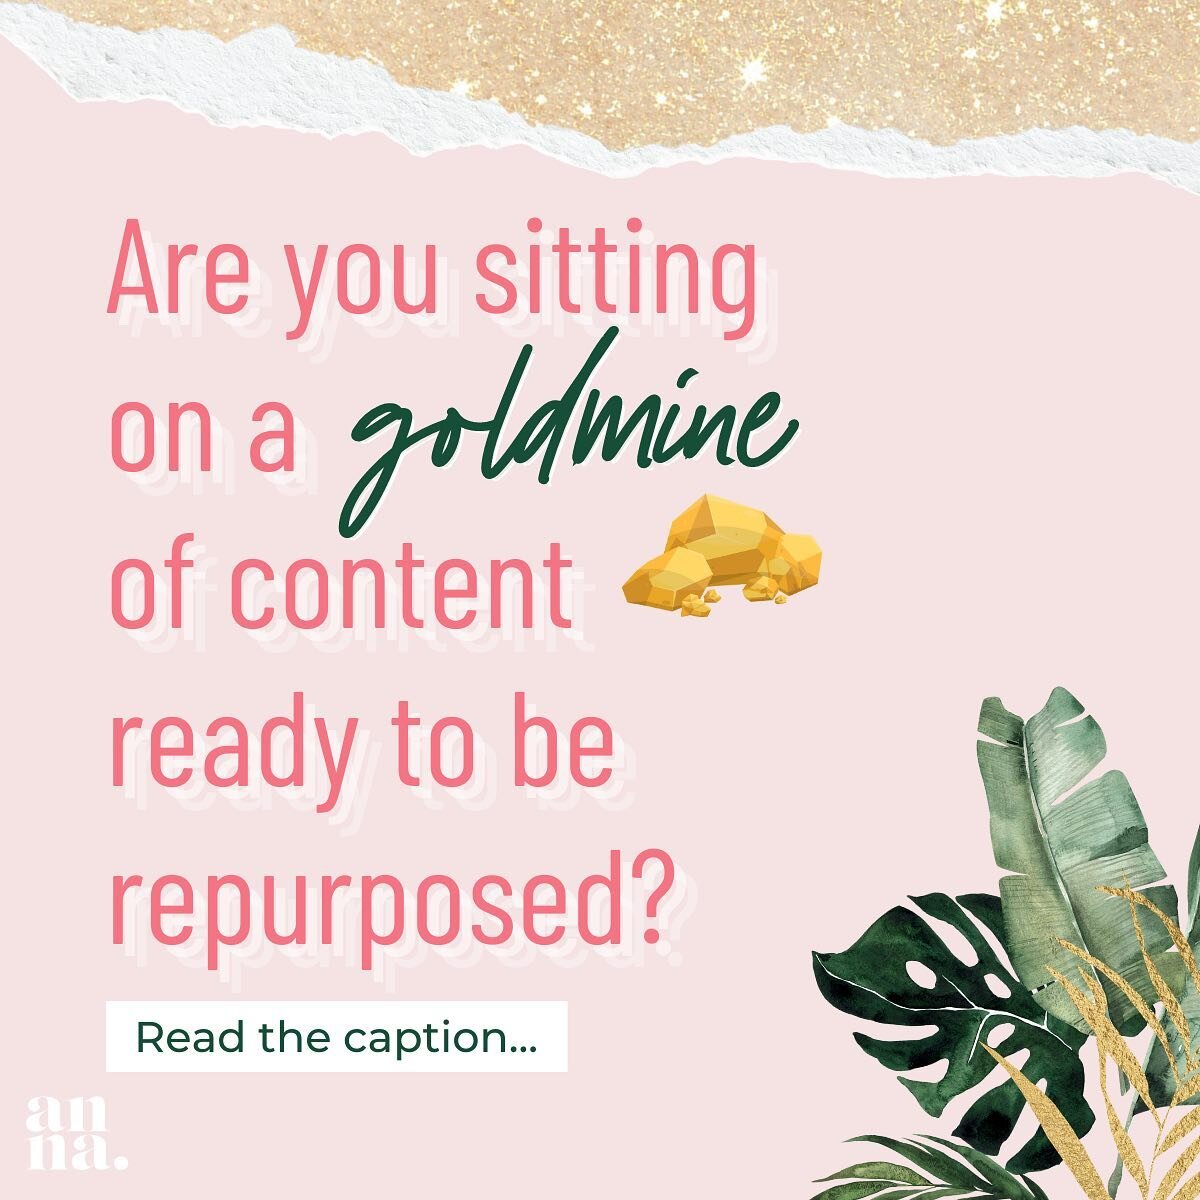 Well, are you? Don't let it go to waste! I'm here to help you make the most out of your content and turn it into a hella valuable asset for your business 👑🌟🏅

If we were working together, here's what I would do with the bank of content you're sitt